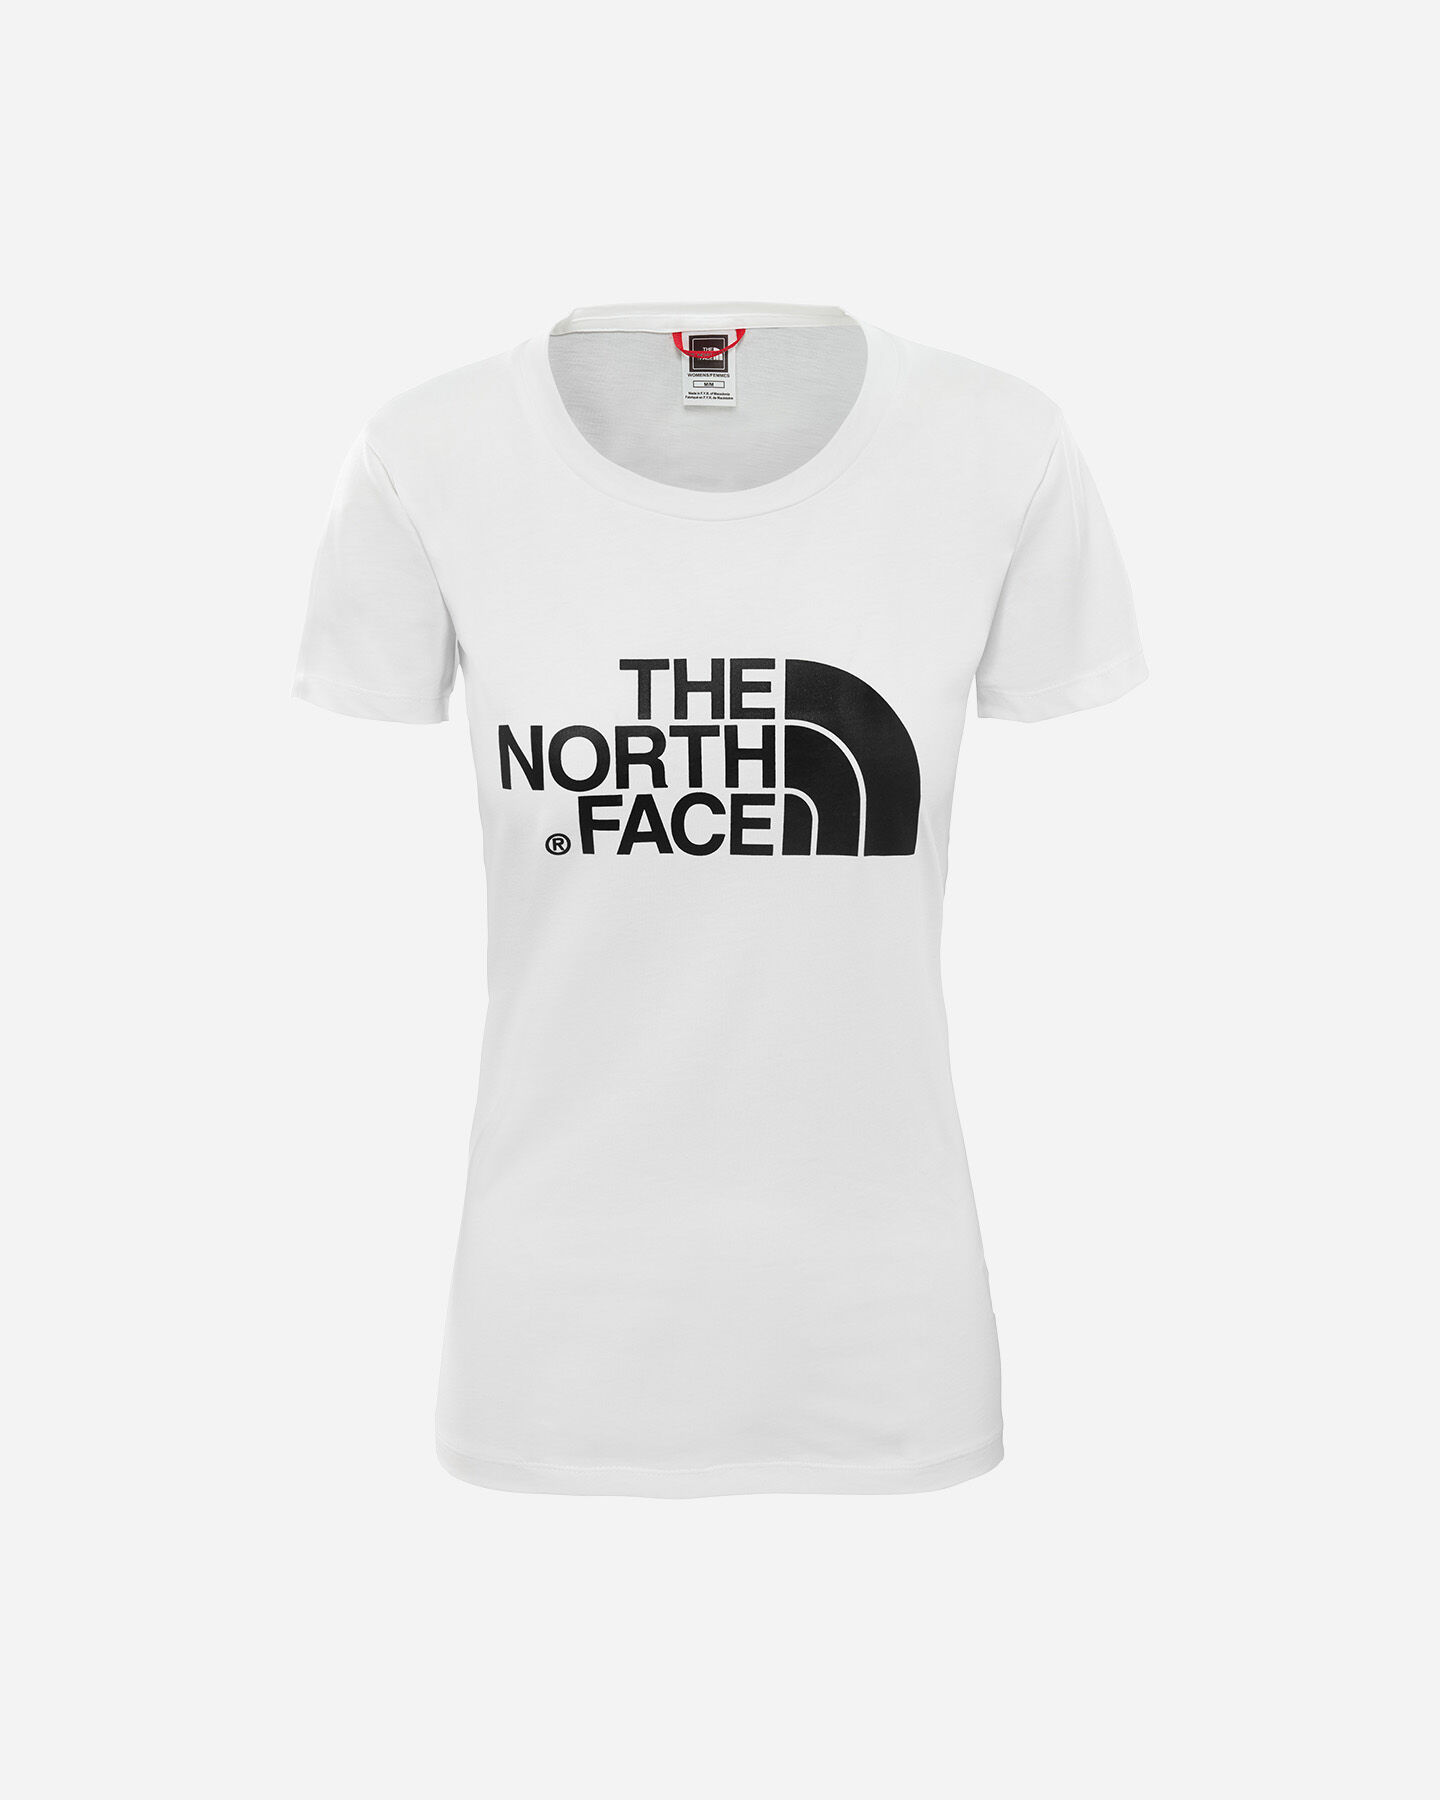  T-Shirt THE NORTH FACE EASY W S5015032|LG5|L scatto 0